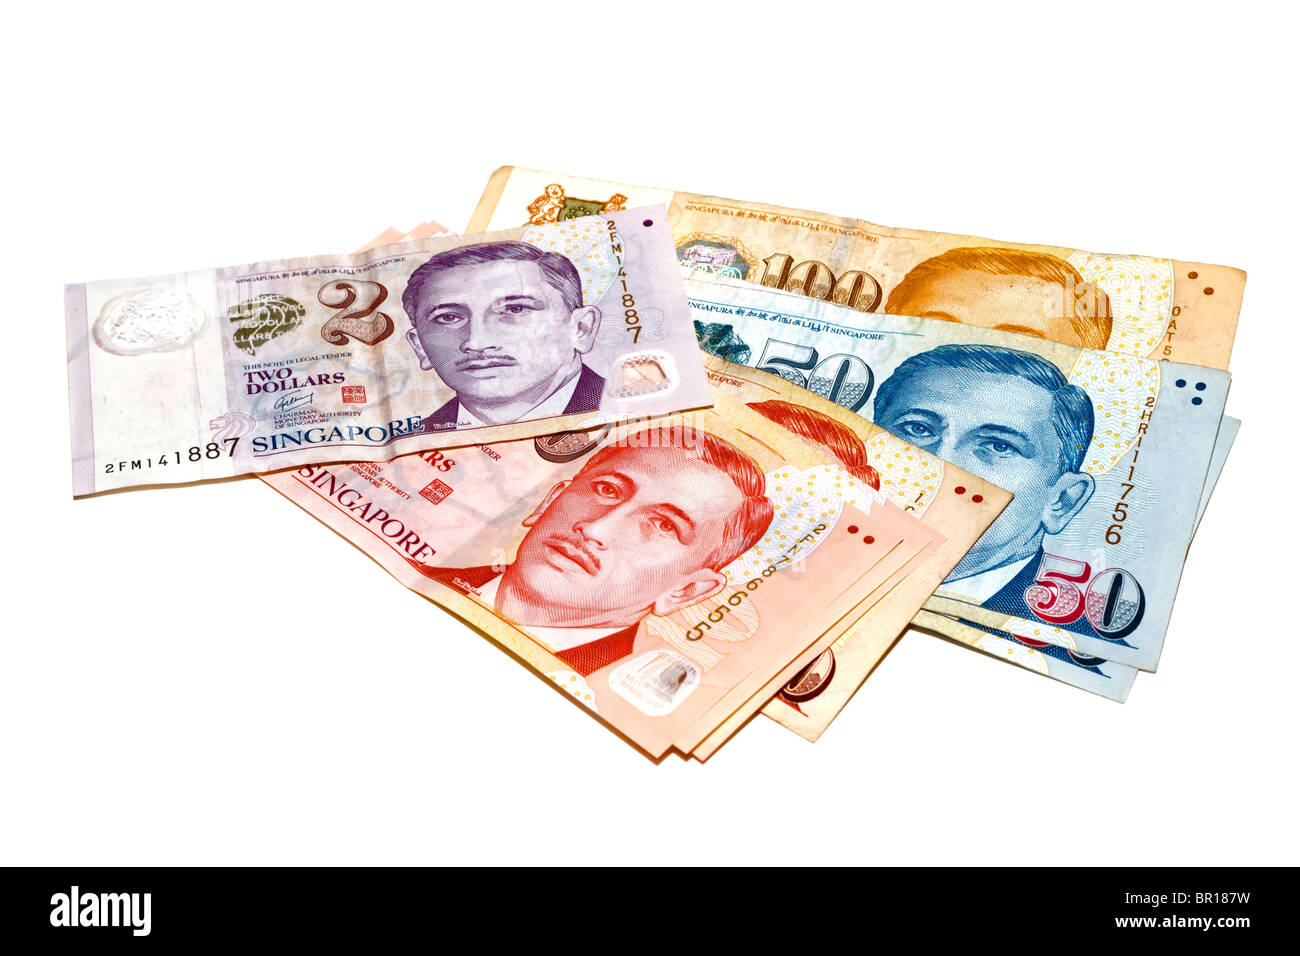 Singapore banknotes in various denominations Stock Photo